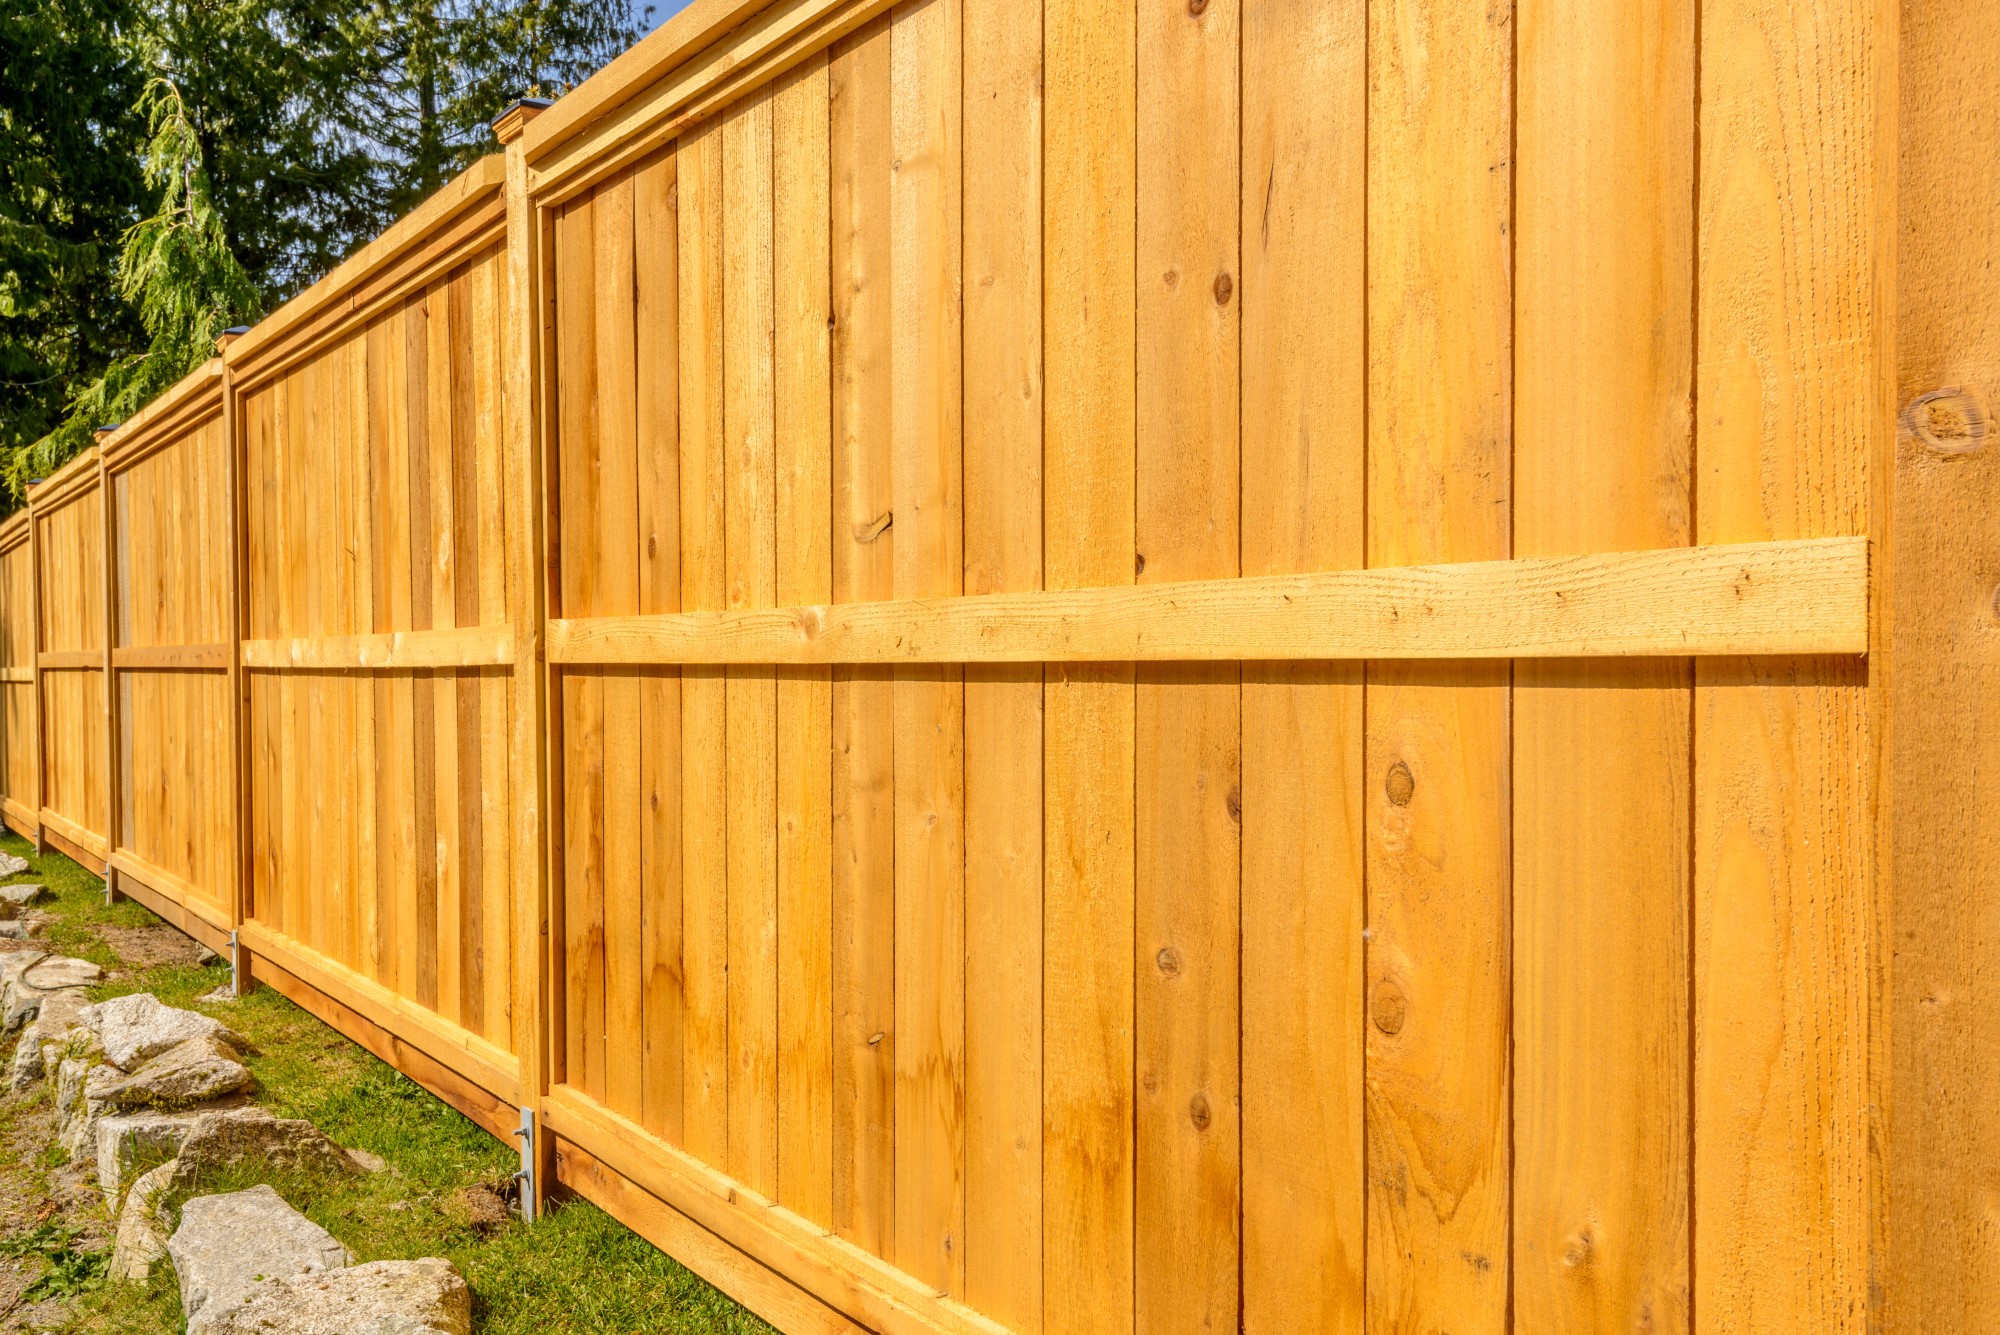 The Different Types of Fences and How to Choose the Right One for Your Home 178629 1 - The Different Types of Fences and How to Choose the Right One for Your Home